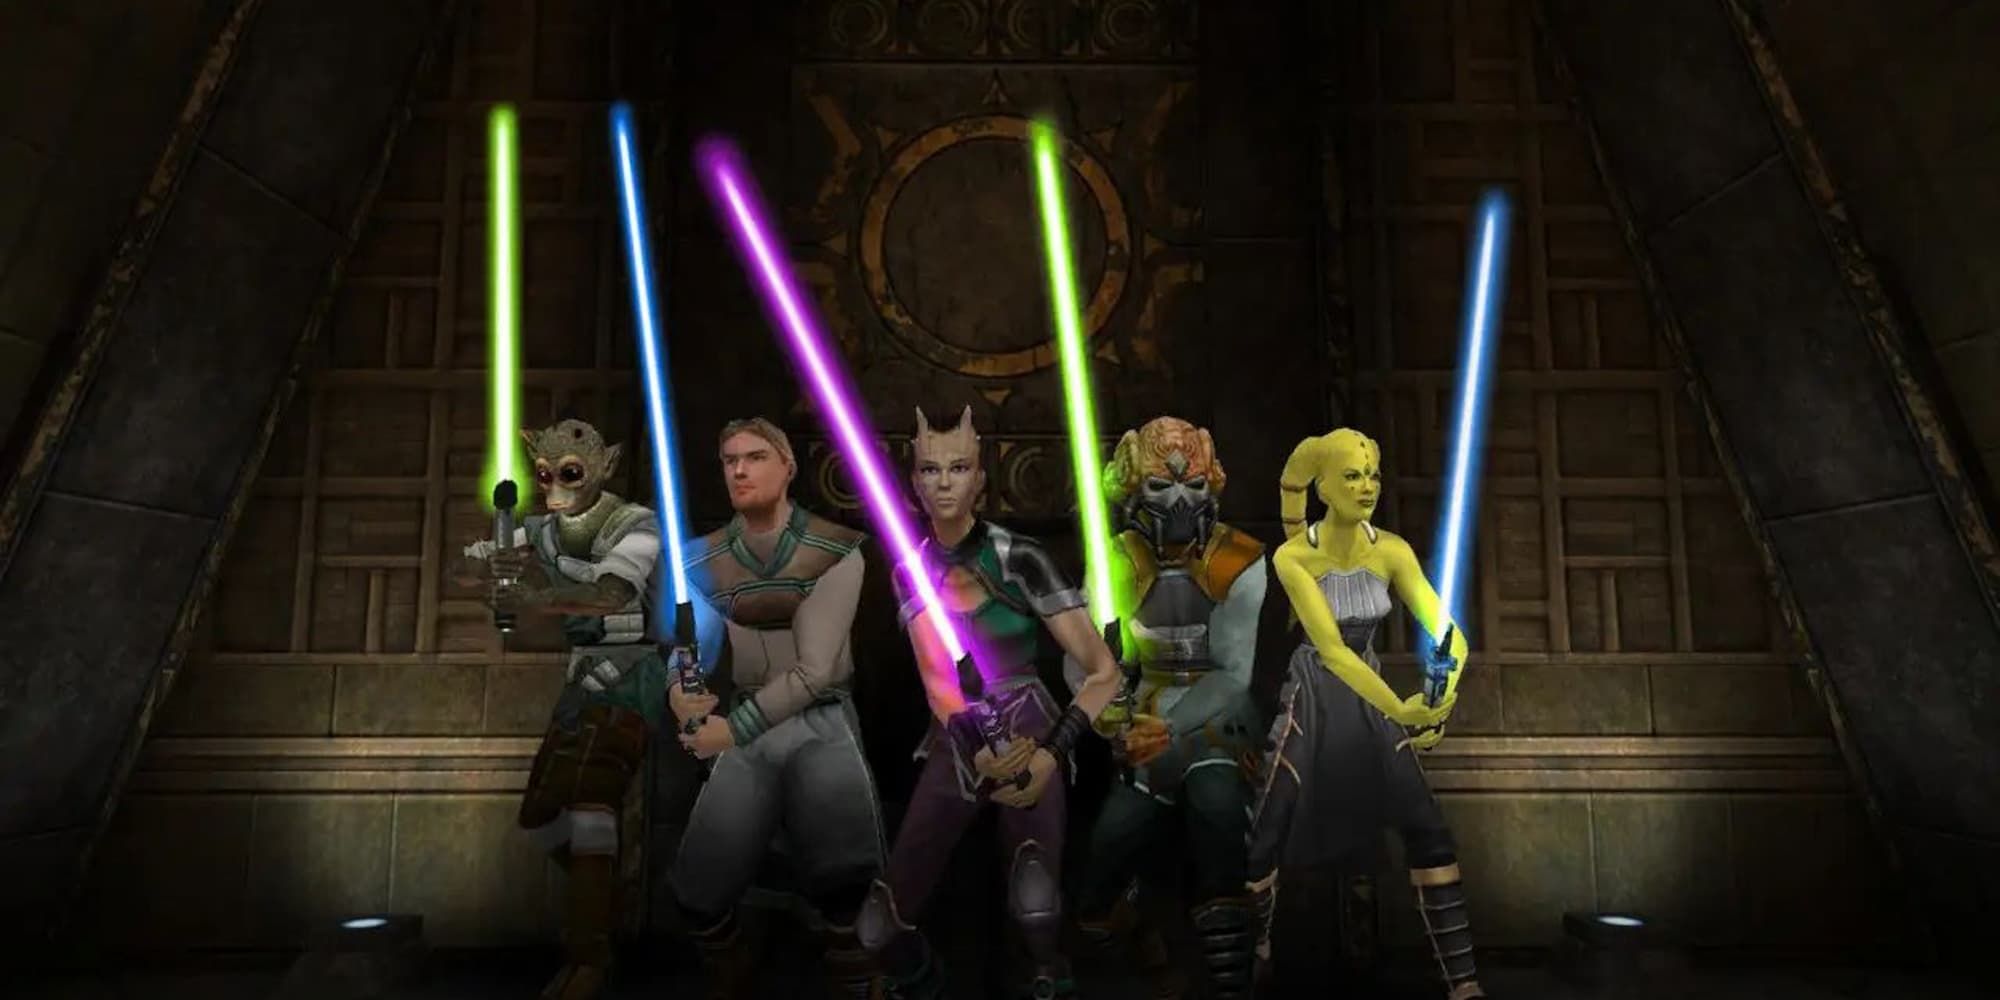 A group of Jedi, of varying species and with varying lightsaber colors, stand in front of a temple entrance in Star Wars: Jedi Knight Jedi Academy.